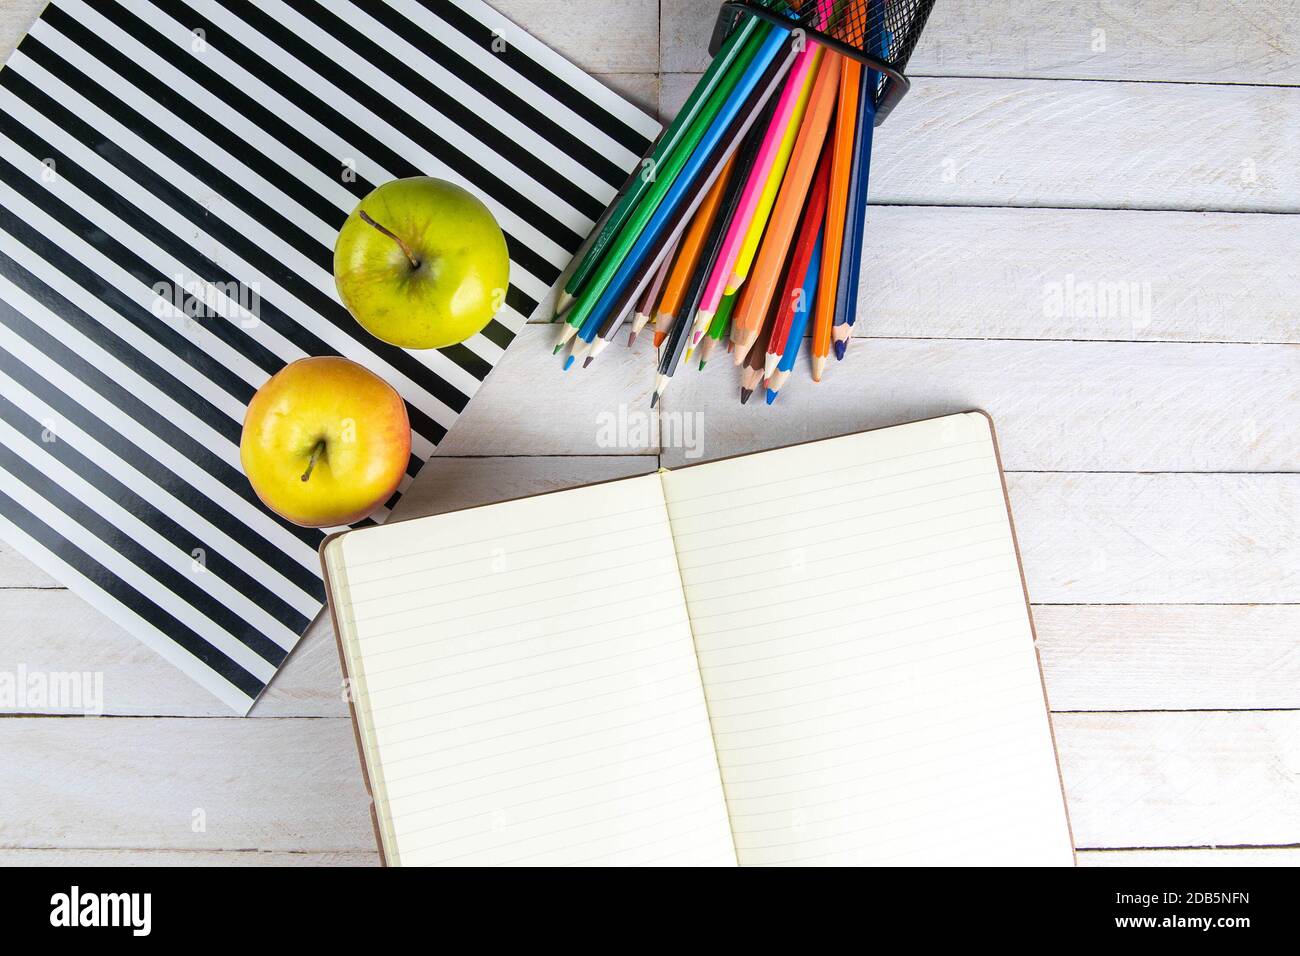 Top view of open notebook with empty pages, pencil and red apples on wooden table in office workspace. Stock Photo